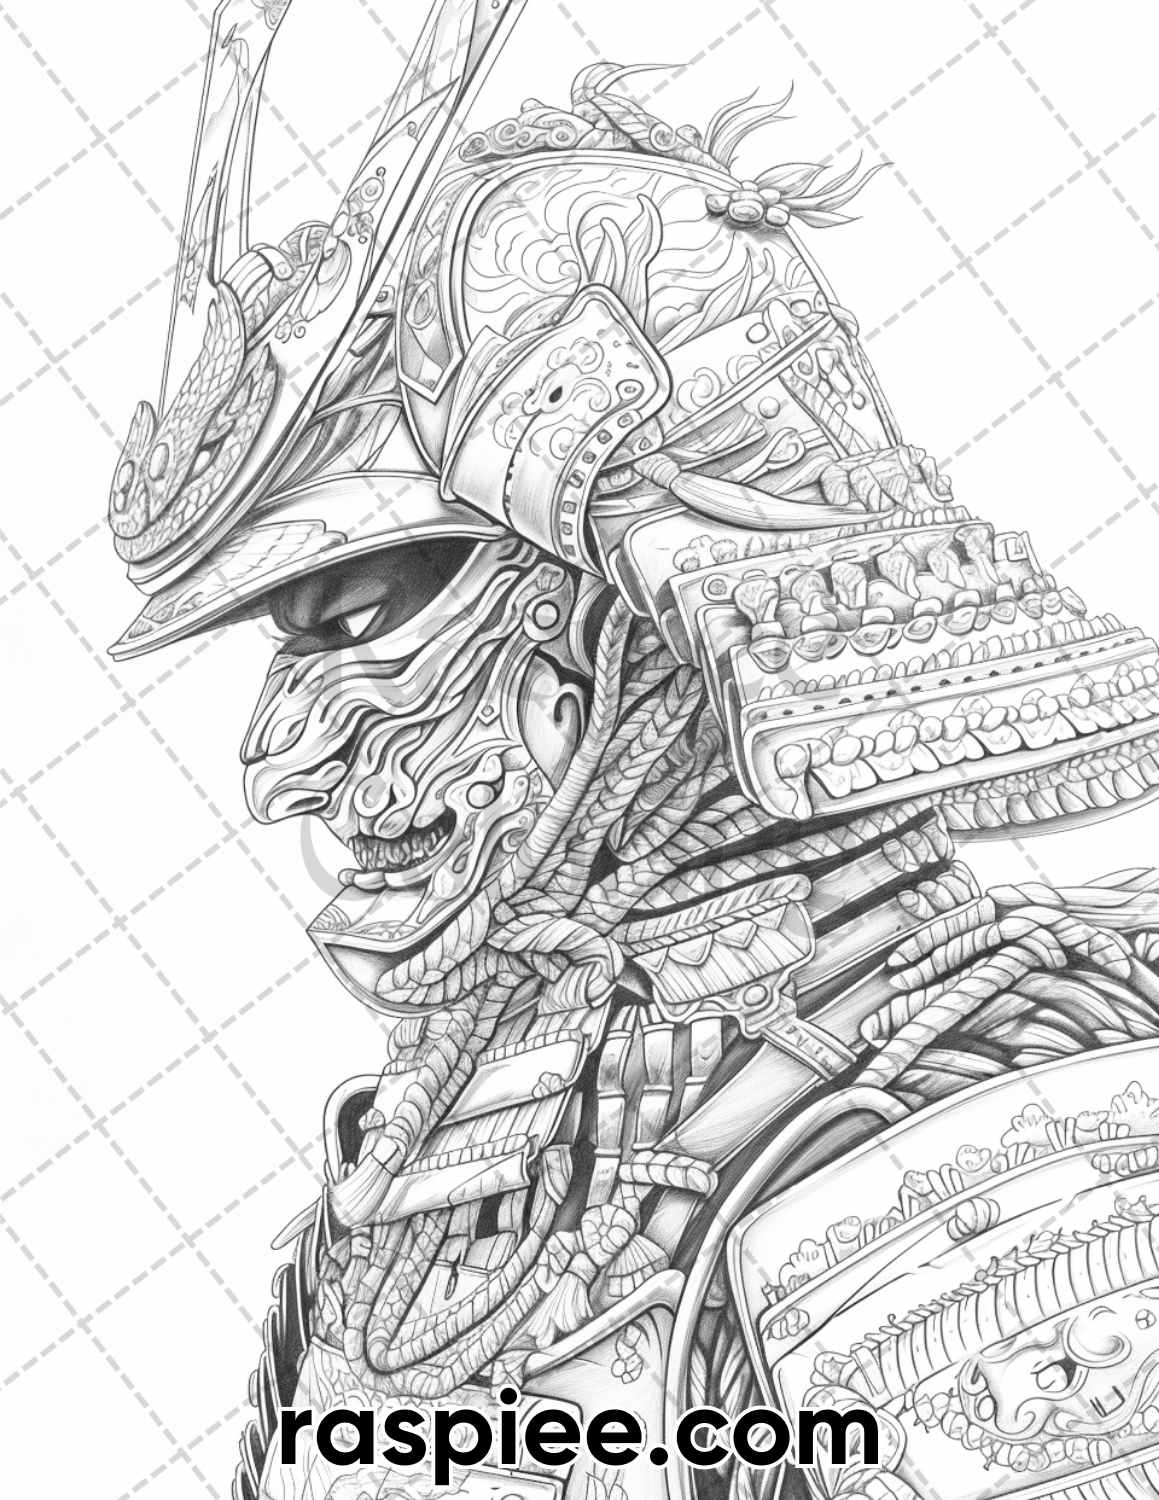 60 Traditional Japanese Tattoos Grayscale Adult Coloring Pages, Printable PDF Instant Download